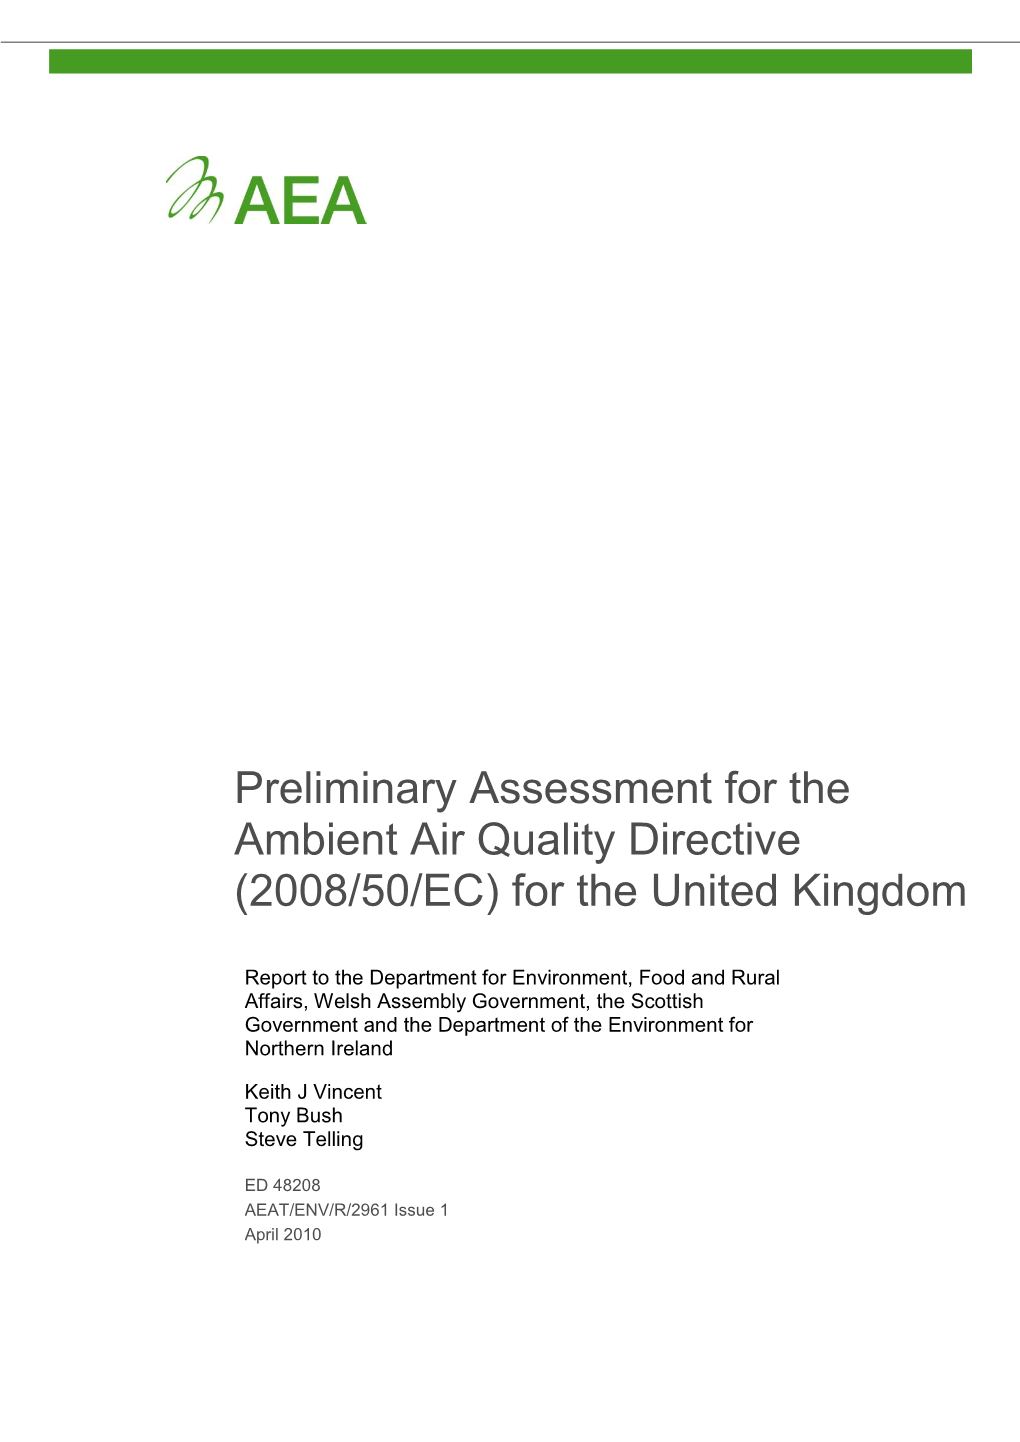 Preliminary Assessment for the Ambient Air Quality Directive (2008/50/EC) for the United Kingdom